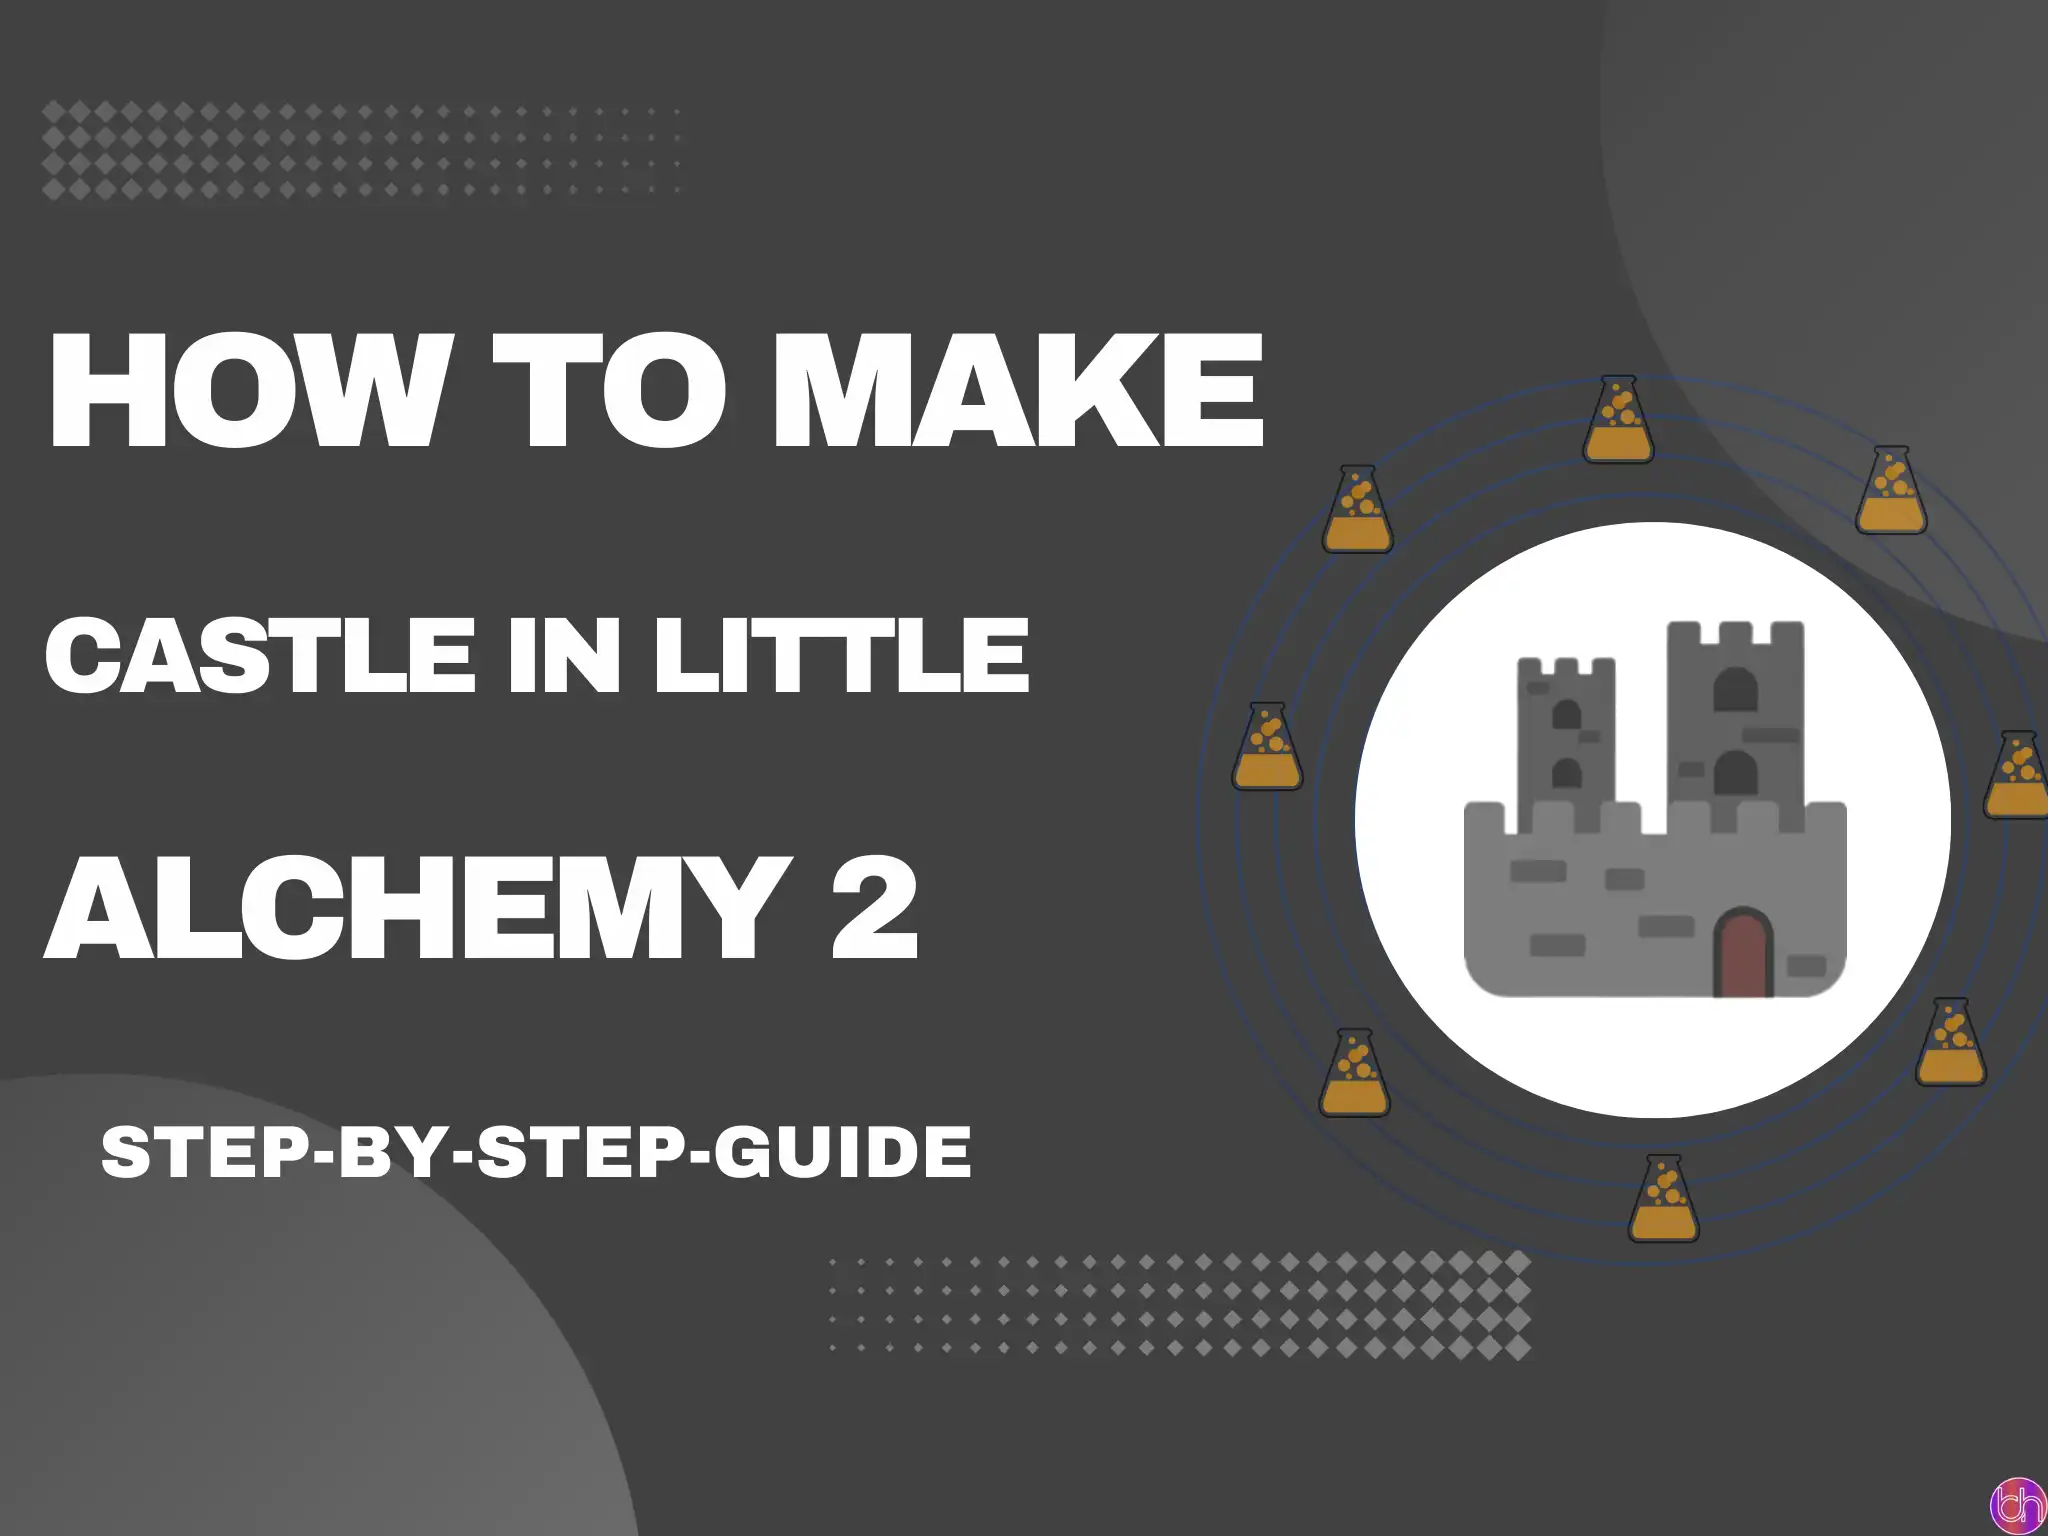 How to make Castle in Little Alchemy 2